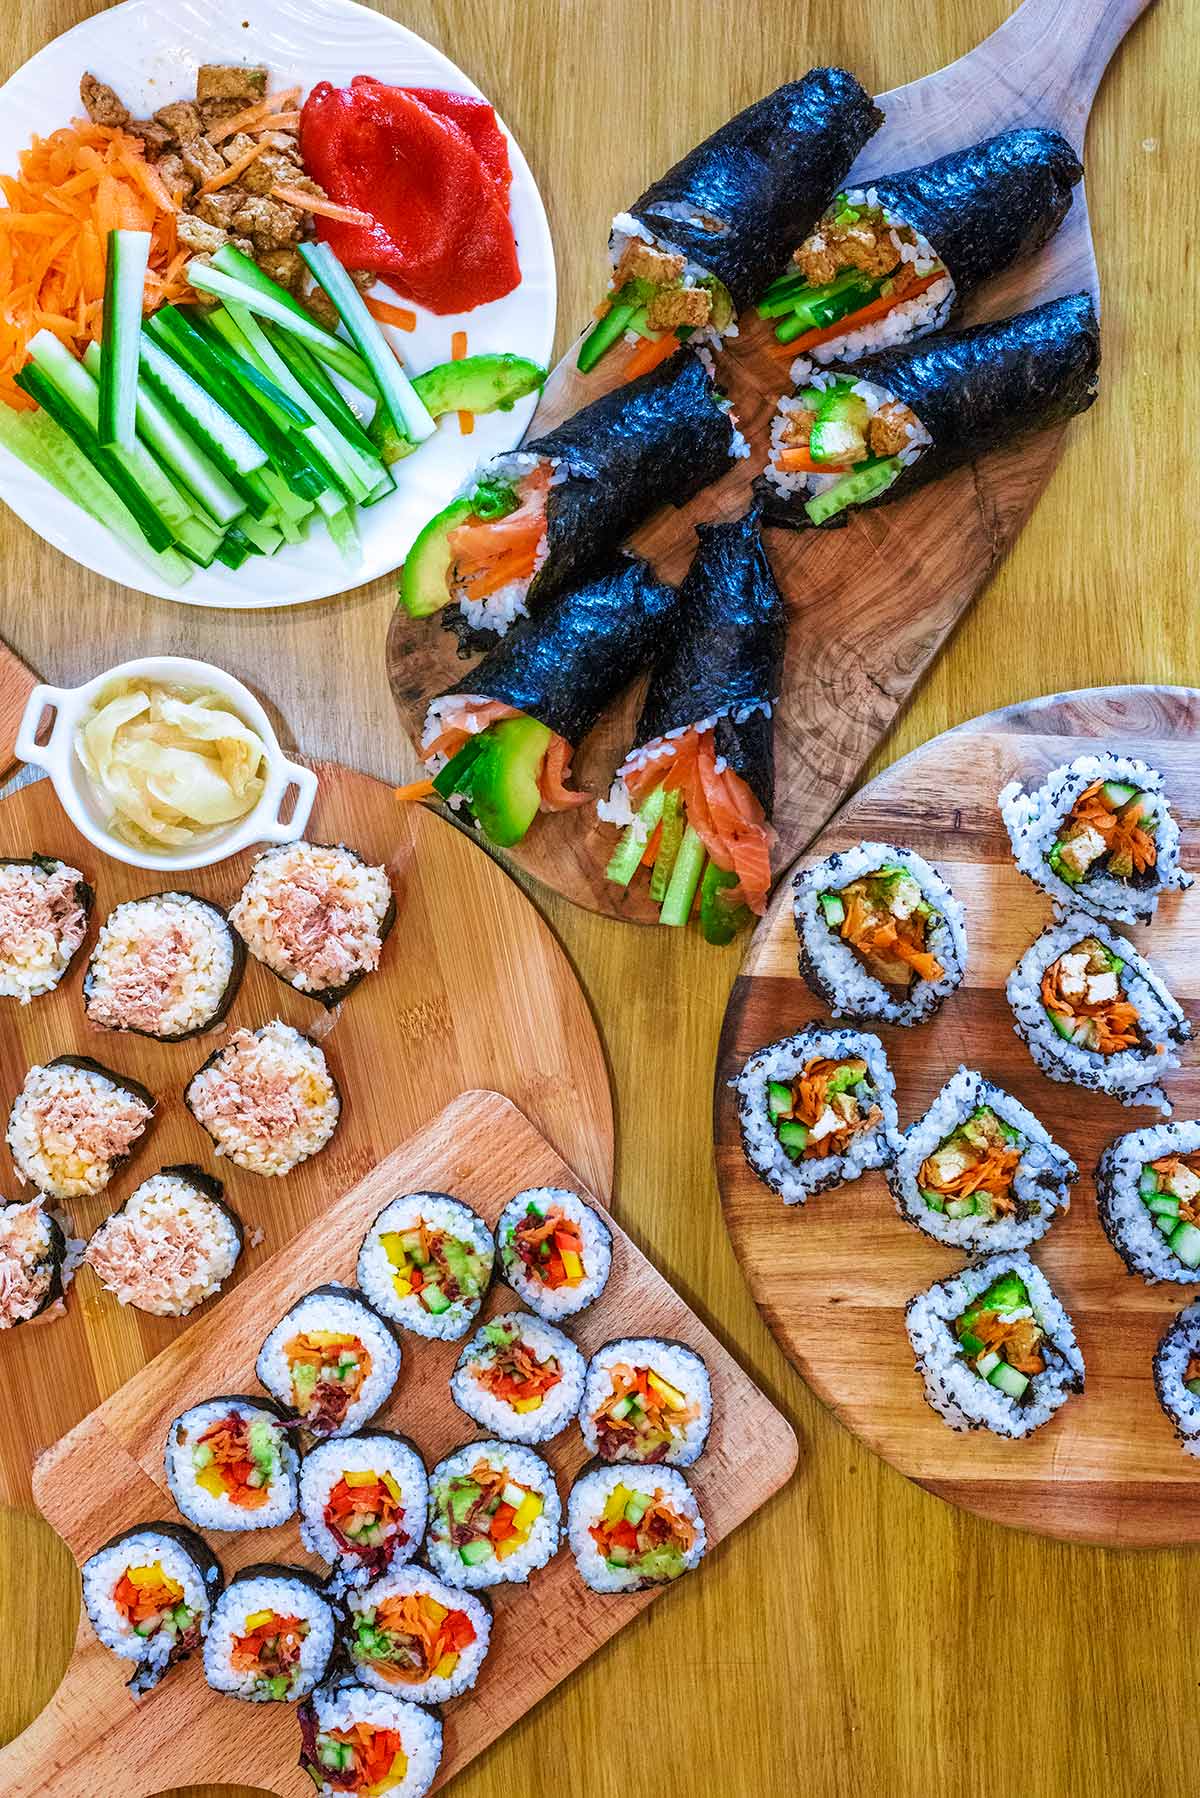 Various types of sushi on different wooden boards.